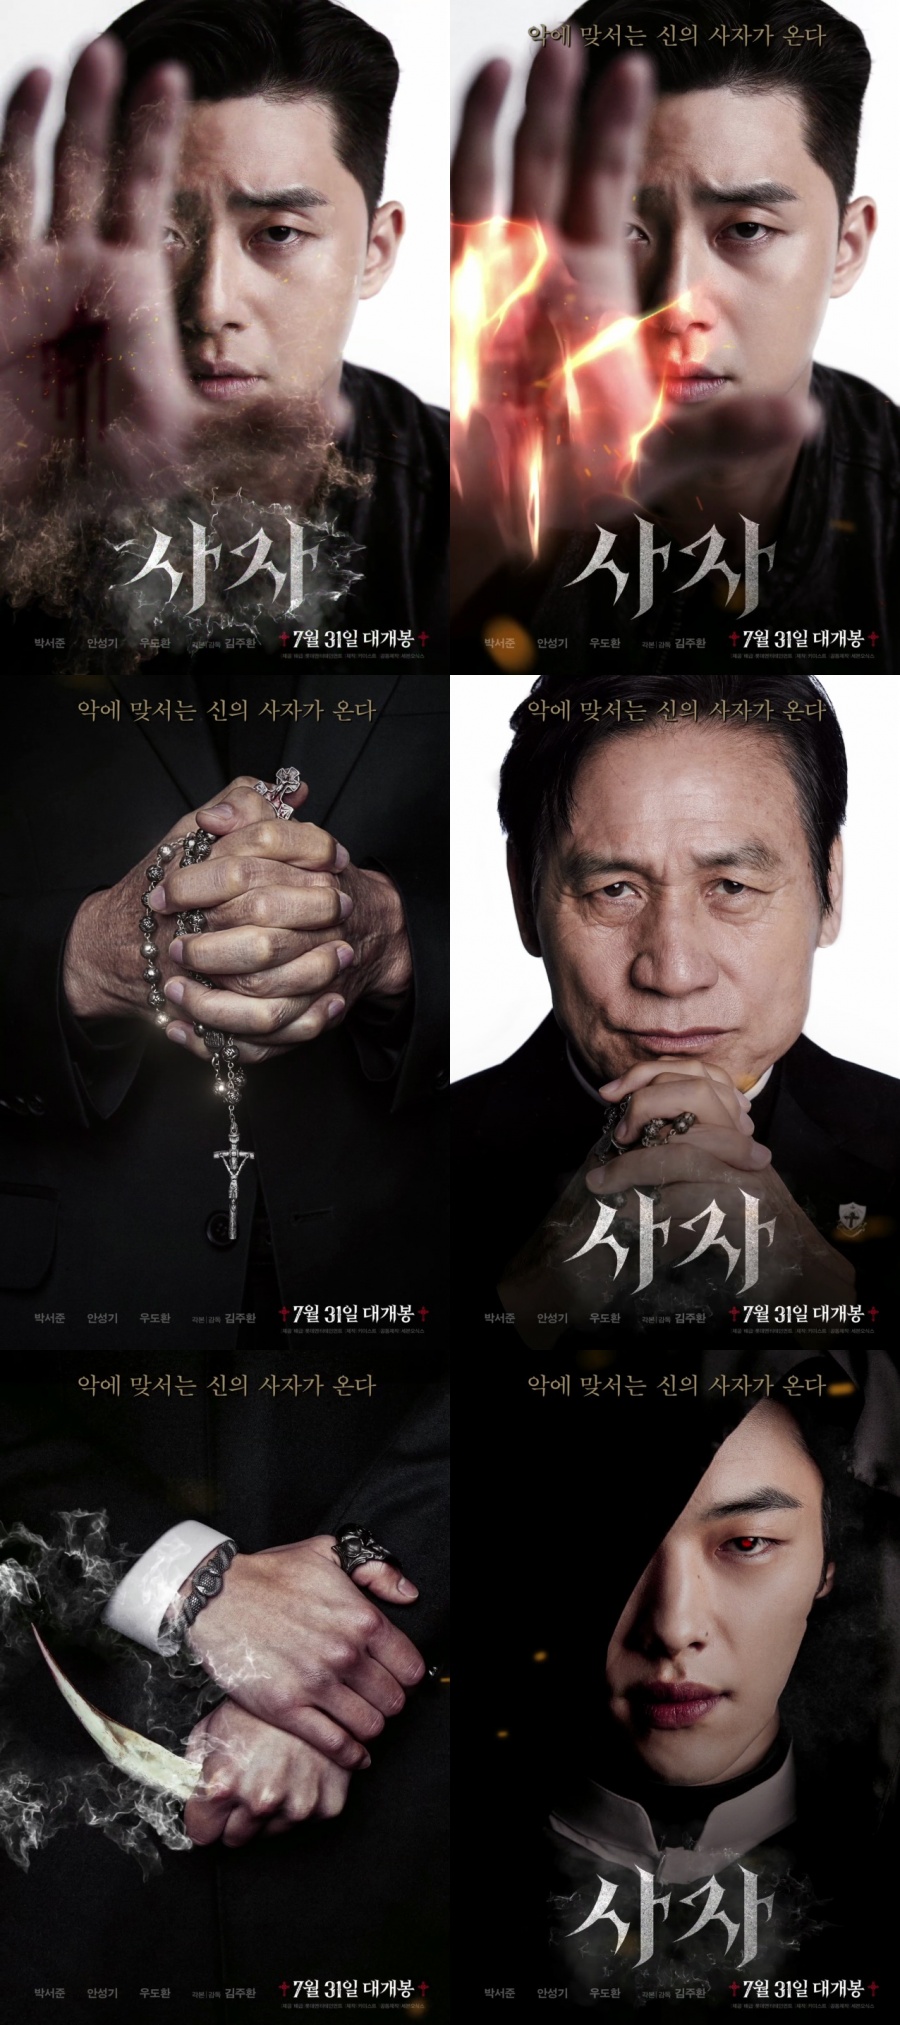 The movie The Lion predicted intense synergy.On the 4th, investment distributor Lotte Entertainment released motion posters of Lion (director Kim Joo-hwan, production Keith, co-production Seven Oxyx) characters.The Lion is a story about fighting champion Yonghu (Park Seo-joon) meeting with the Old Man priest Anshinbu (Ahn Sung-ki) to confront the powerful evil that has confused the world.It is the second time that Park Seo-joon and director Kim Joo-hwan of Youth Police who caused a box office hit in the theater in summer 2017.The public poster begins with a copy of The lion of God against evil comes, and a visual of the martial arts champion Yonghu, whose special power is displayed in the wound of his hand.One day, when a deep wound is created and the priest Anshinbu meets the wounded hand and realizes that there is a special power in the wounded hand, Yonghu is expected to show intense action that shows strong power like flames in the wound of the hand as soon as he overpowers the bumazah.The priest Anshinbu, who appeared with a rosary in his hand, attracts attention with his heavy presence, which is felt by his long experience and age.The Anshinbu, who is against evil hidden in the world, will emit warmth like a mentor and father from the charisma of carrying out the consciousness of the Buddha with his life based on his strong beliefs.While the sharp objects and ornaments with animal shapes, which are difficult to guess, amplify tension, the black bishop Jishin (Udohwan), who appears with red eyes, predicts another intensity.Jisin, who has an excellent talent to penetrate and use his opponents weaknesses, plans to start to feel tense by starting to circle around them when his plan is cracked because of the bride and the dragon.The Lion will be released on the 31st.=